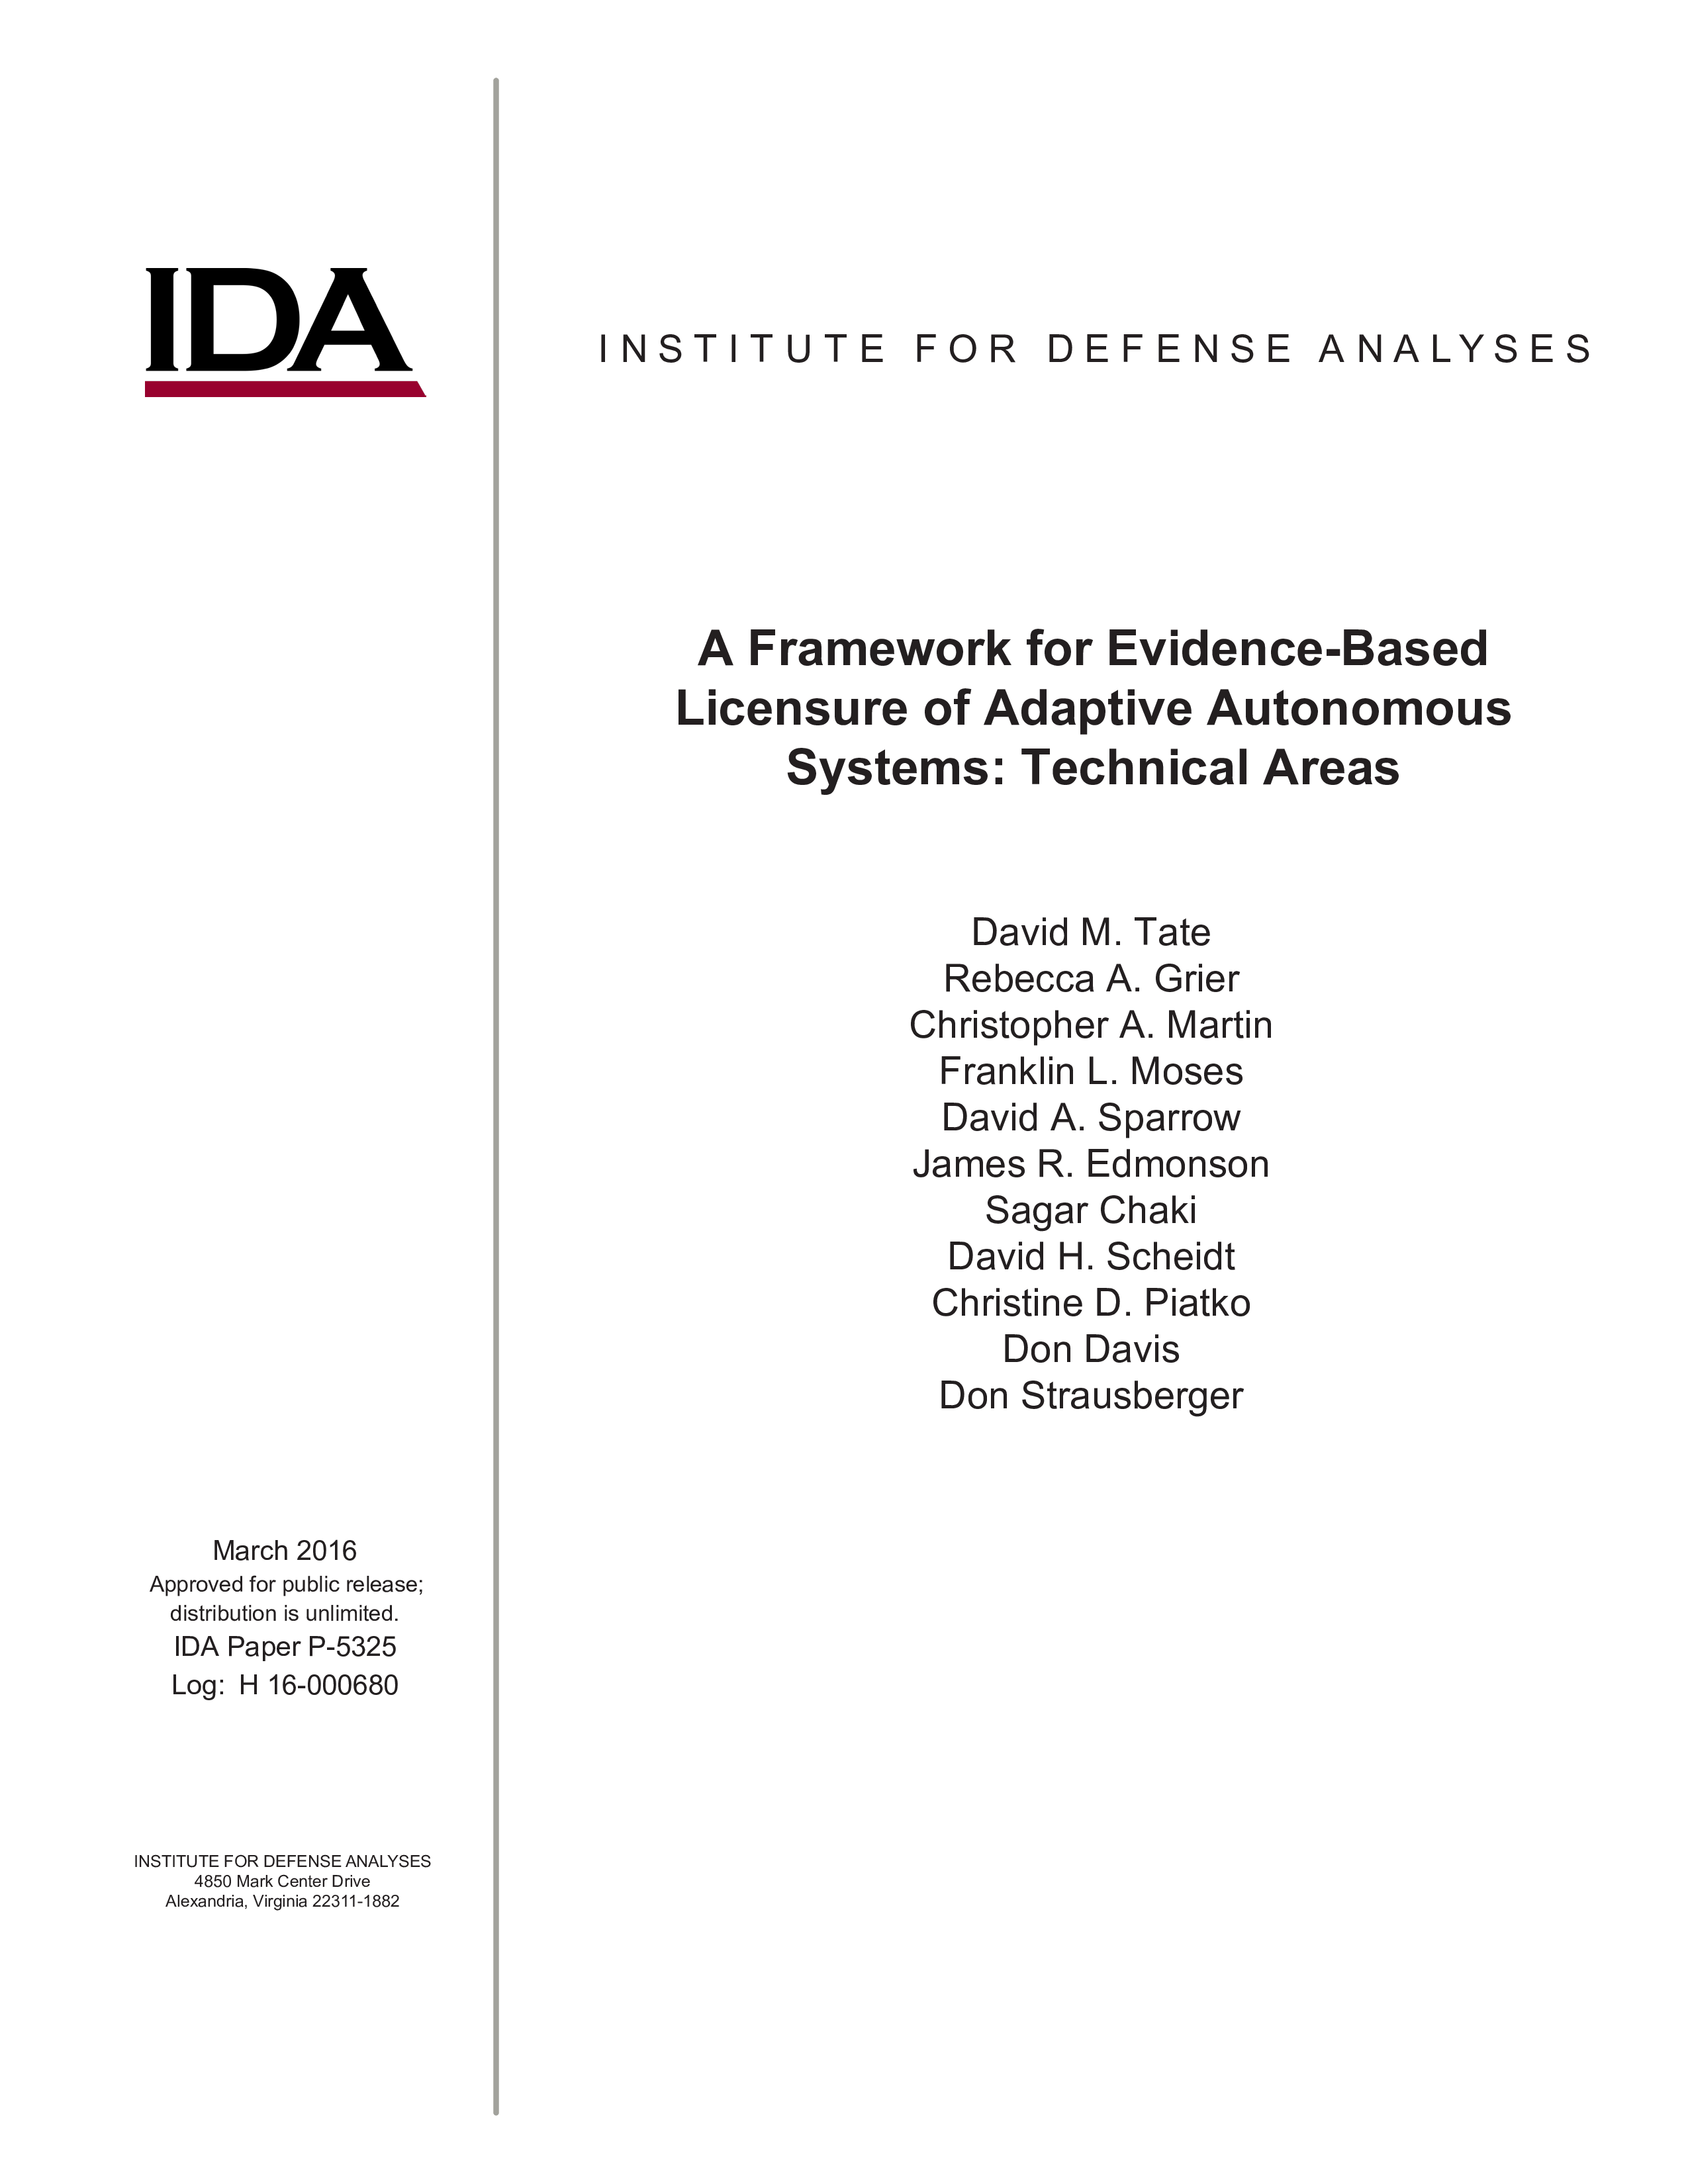 A Framework for EvidenceBased Licensure of Adaptive Autonomous Systems Technical Areas